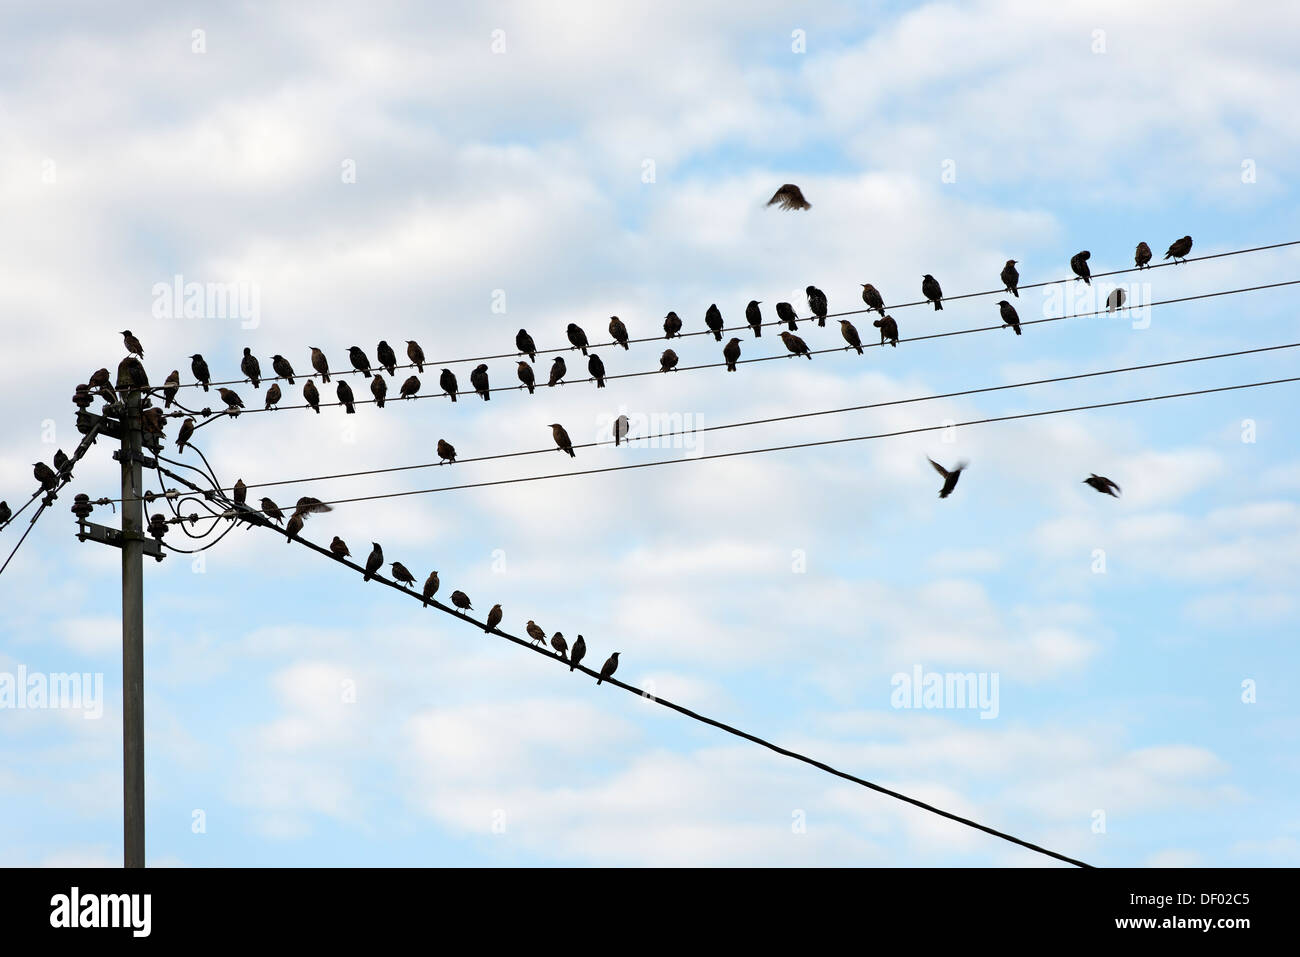 Starlings (Sturnidae) perched on a power line, Upper Bavaria, Bavaria Stock Photo